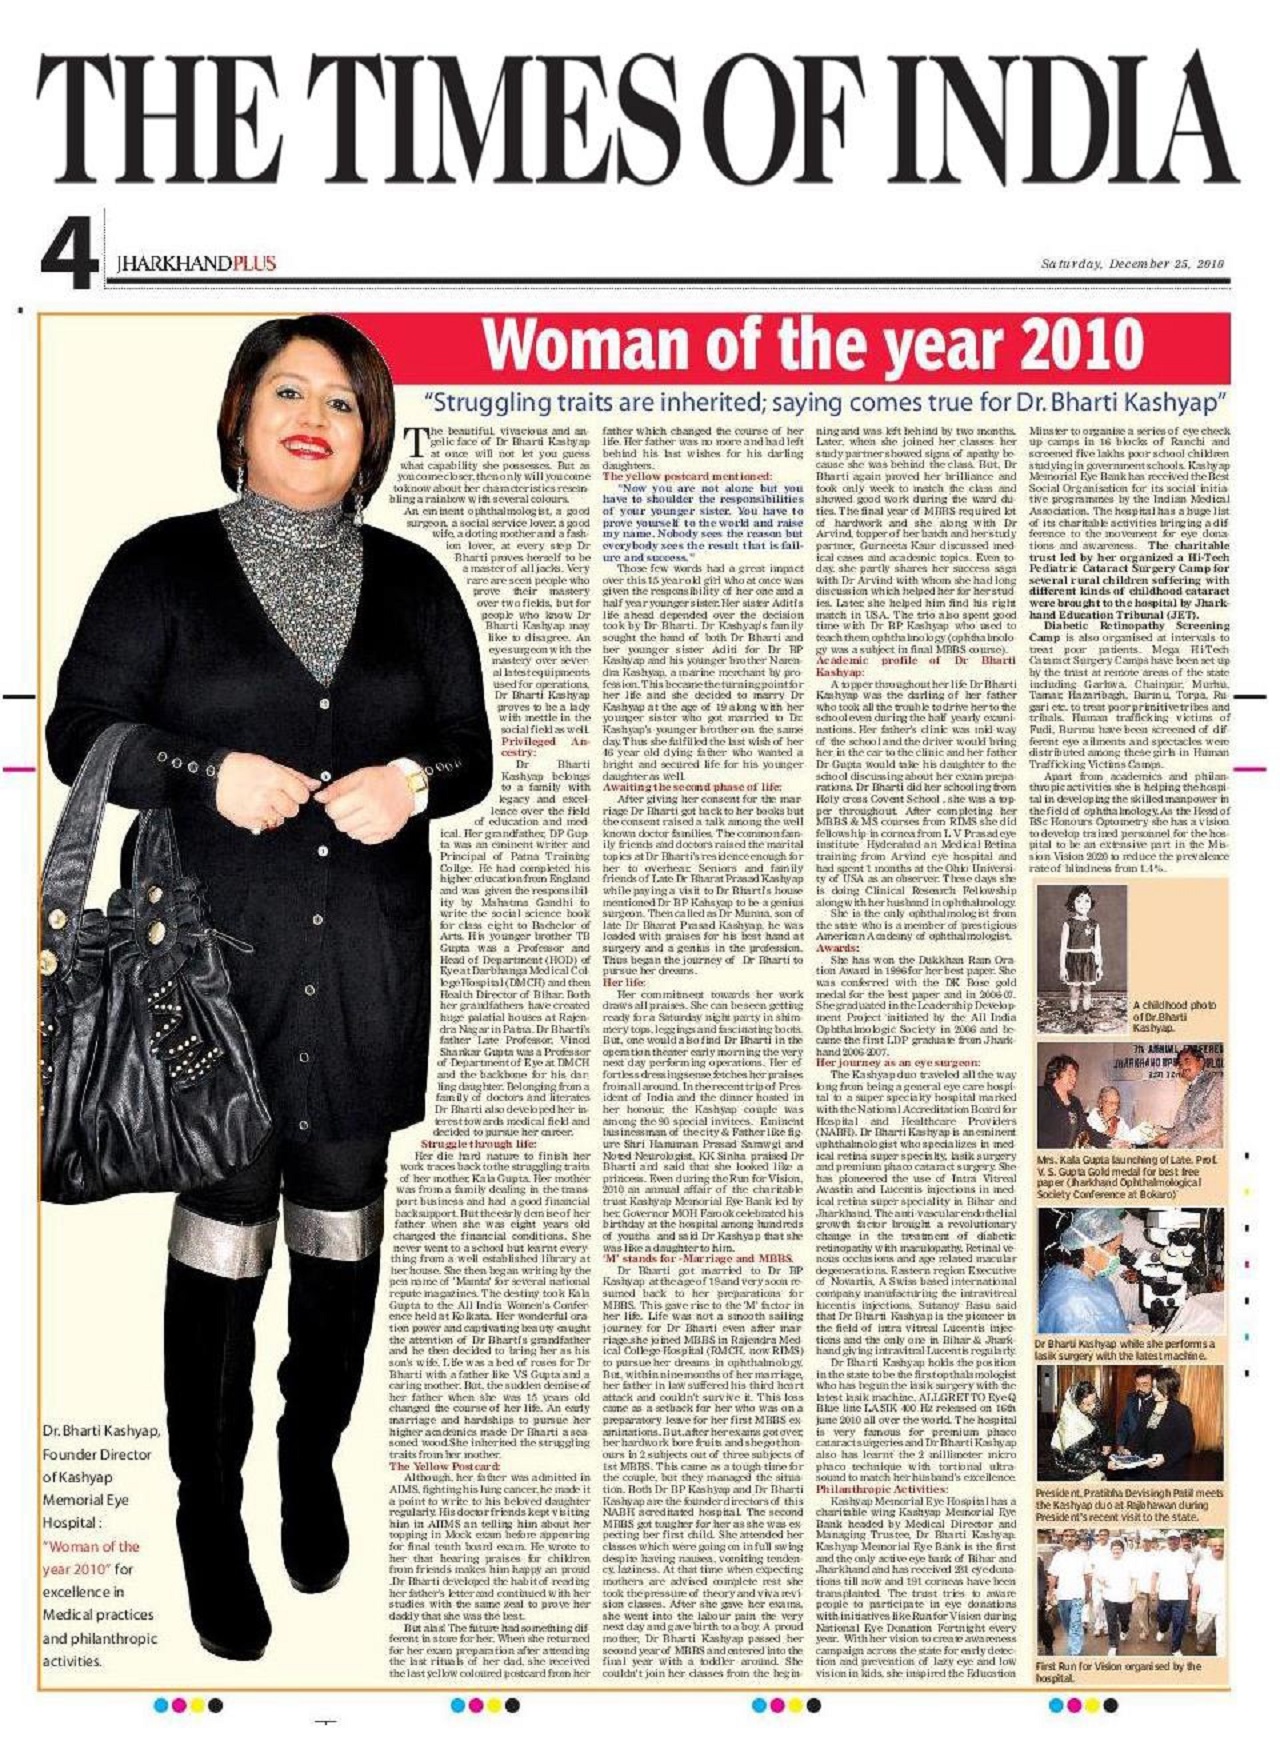 Dr. Bharti Kashyap: Woman of the year 2010 by The Times of India